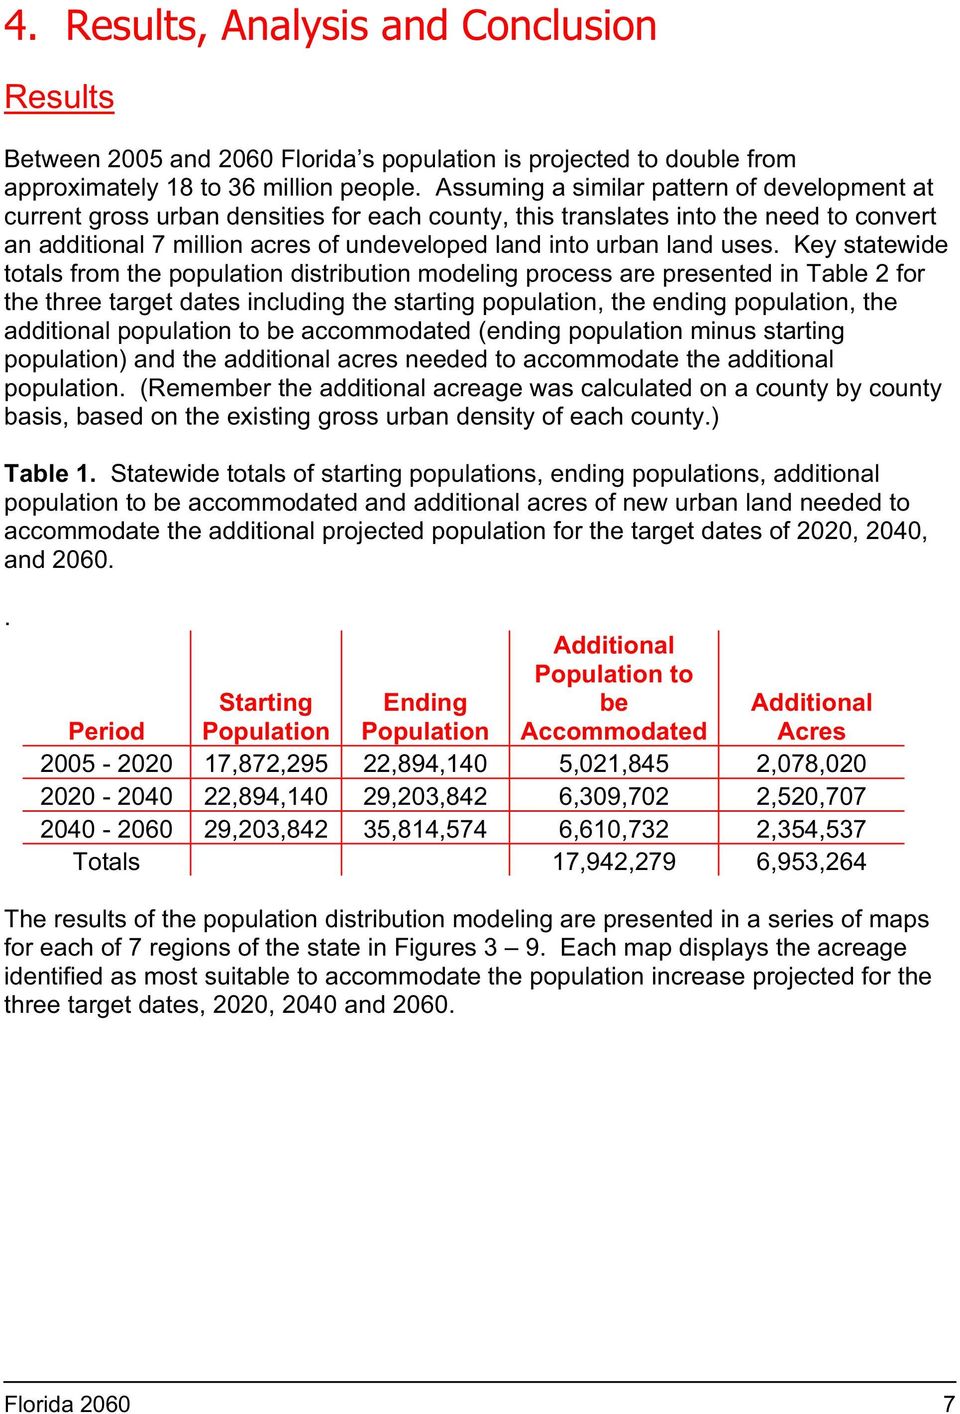 uses. Key statewide totals from the population distribution modeling process are presented in Table 2 for the three target dates including the starting population, the ending population, the